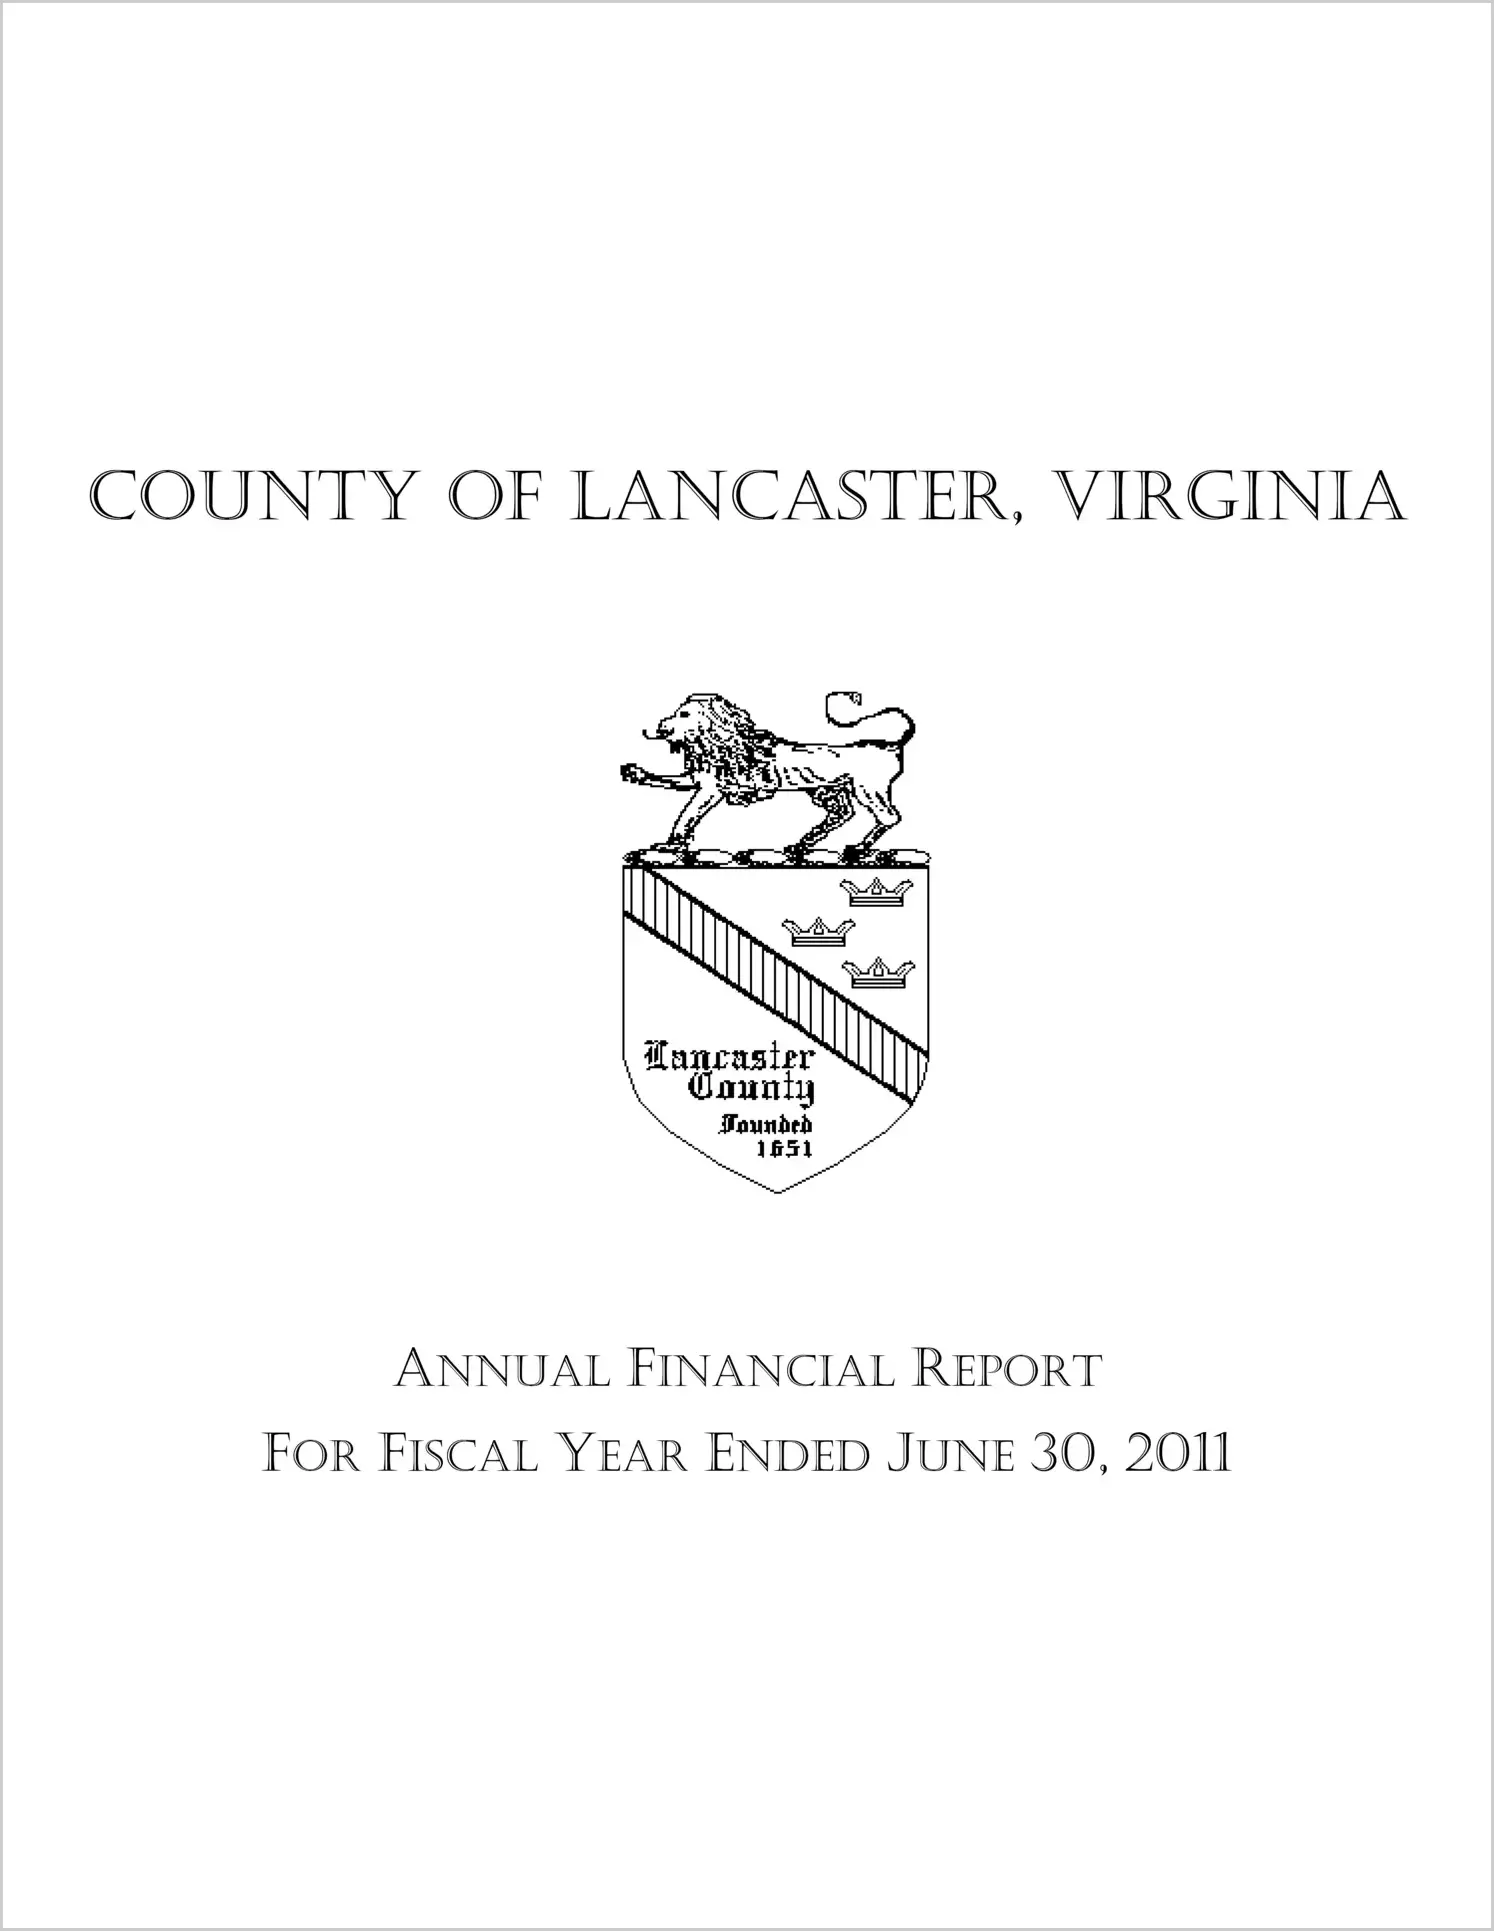 2011 Annual Financial Report for County of Lancaster